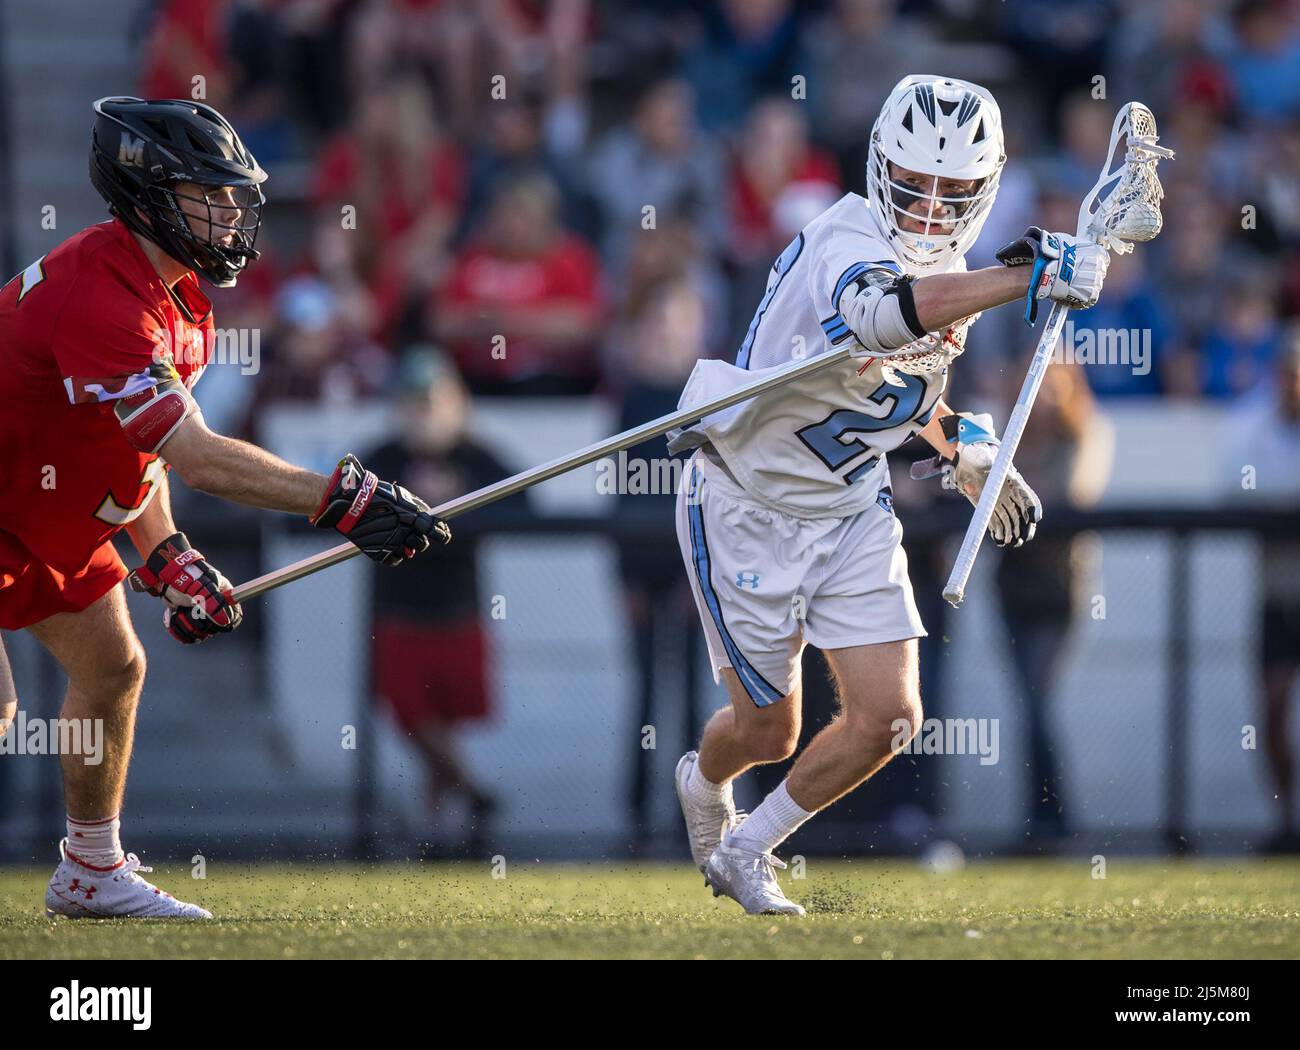 April 23, 2022: Johns Hopkins midfielder Jacob Angelus (23) maneuvers behind the net during the ncaa men's lacrosse regular season finale between the Maryland Terrapins and the Johns Hopkins Blue Jays at Homewood Field in Baltimore, Maryland Photographer: Cory Royster Stock Photo